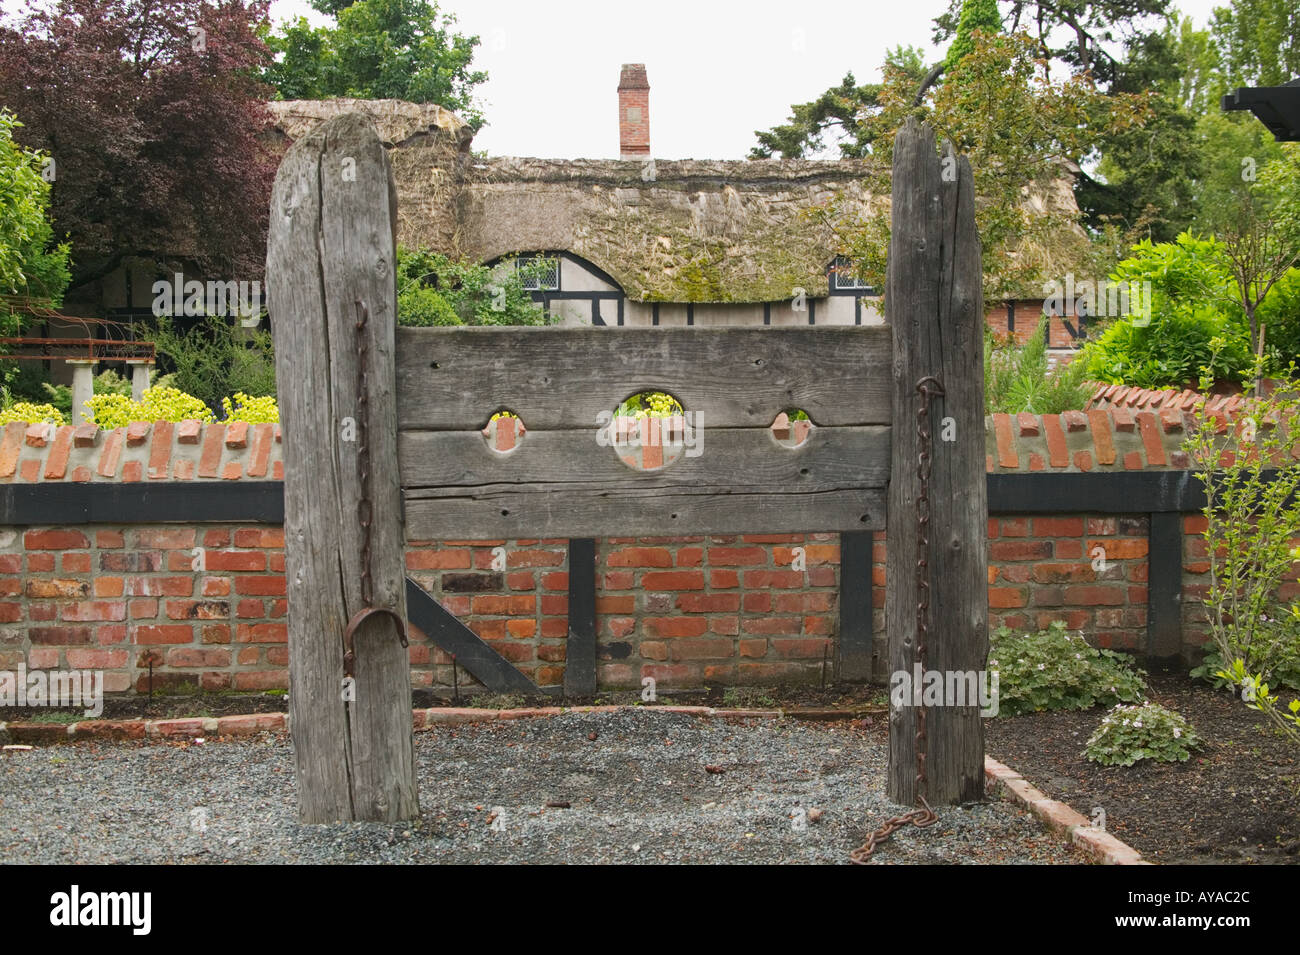 Stocks outside replica of Anne Hathaway's thatched roof cottage at the Old English Inn in Victoria British Columbia Canada Stock Photo